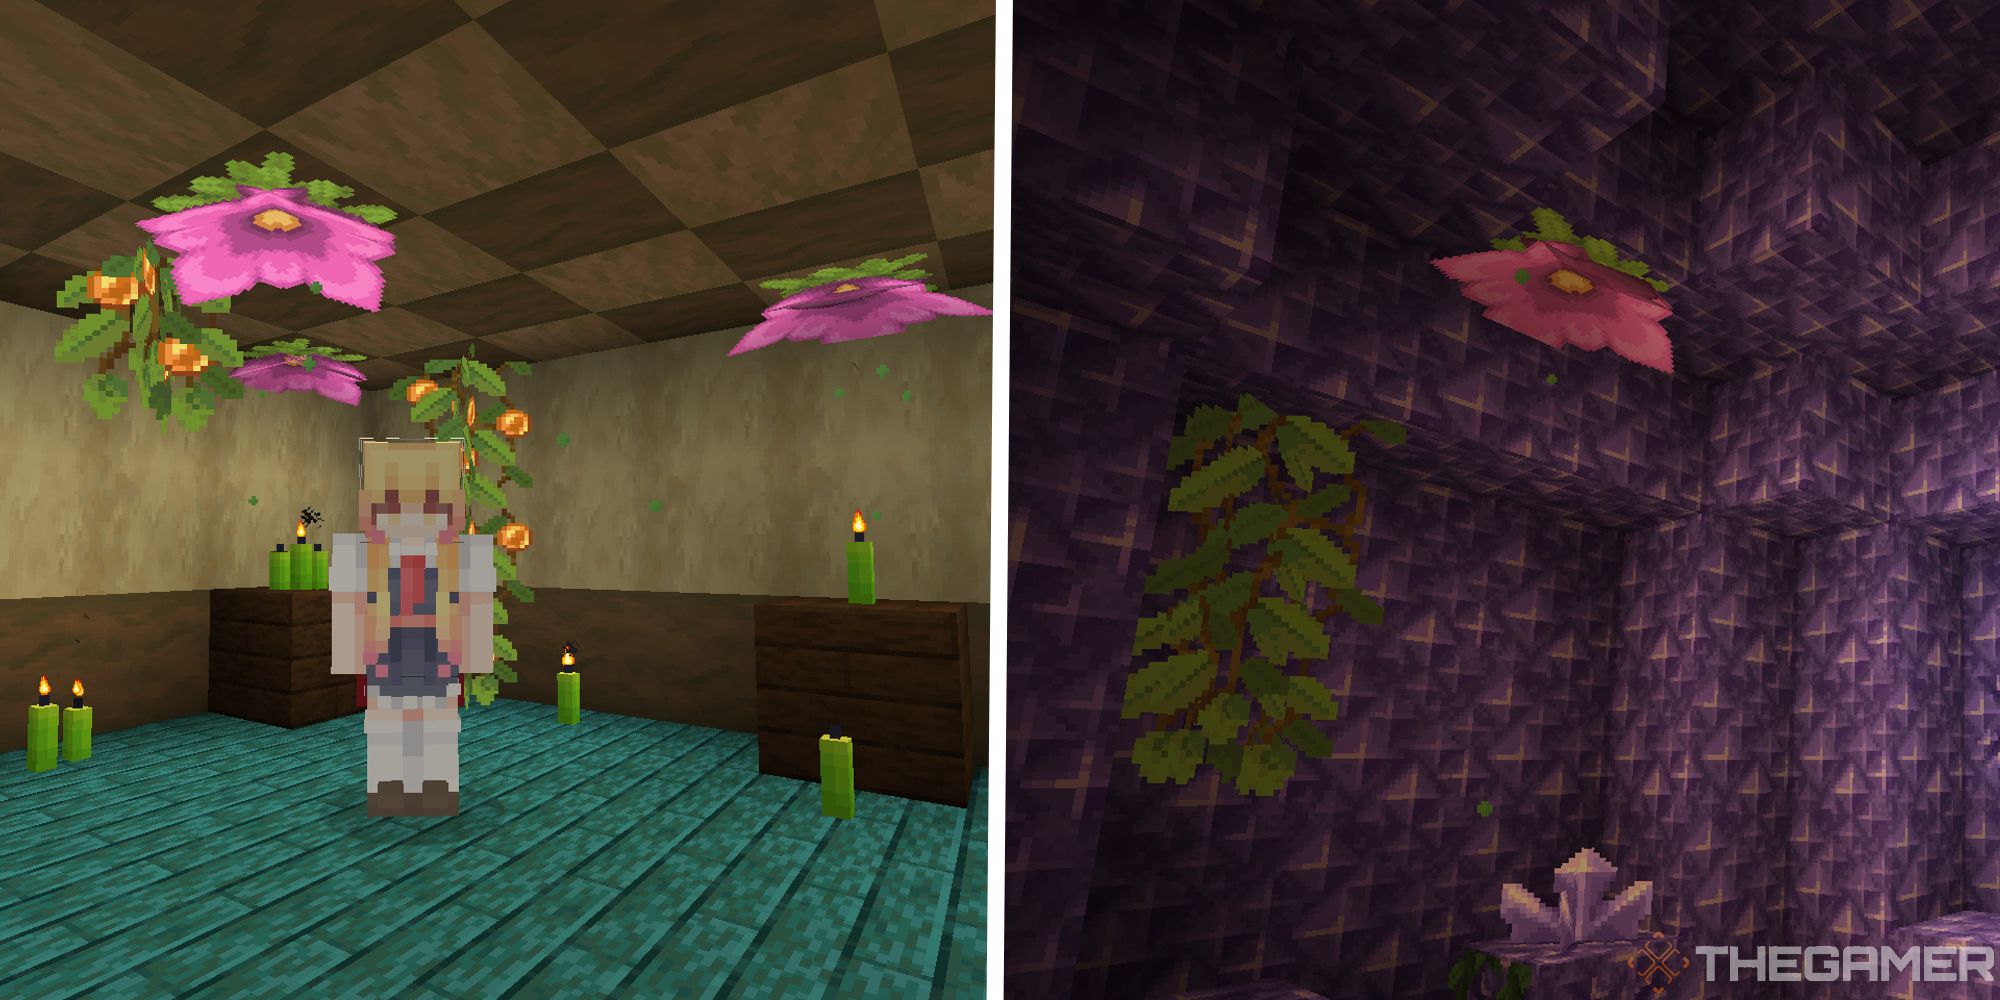 player standing in spore blossom decorated room, next to image of spore blossom in amethyst lush cave biome 